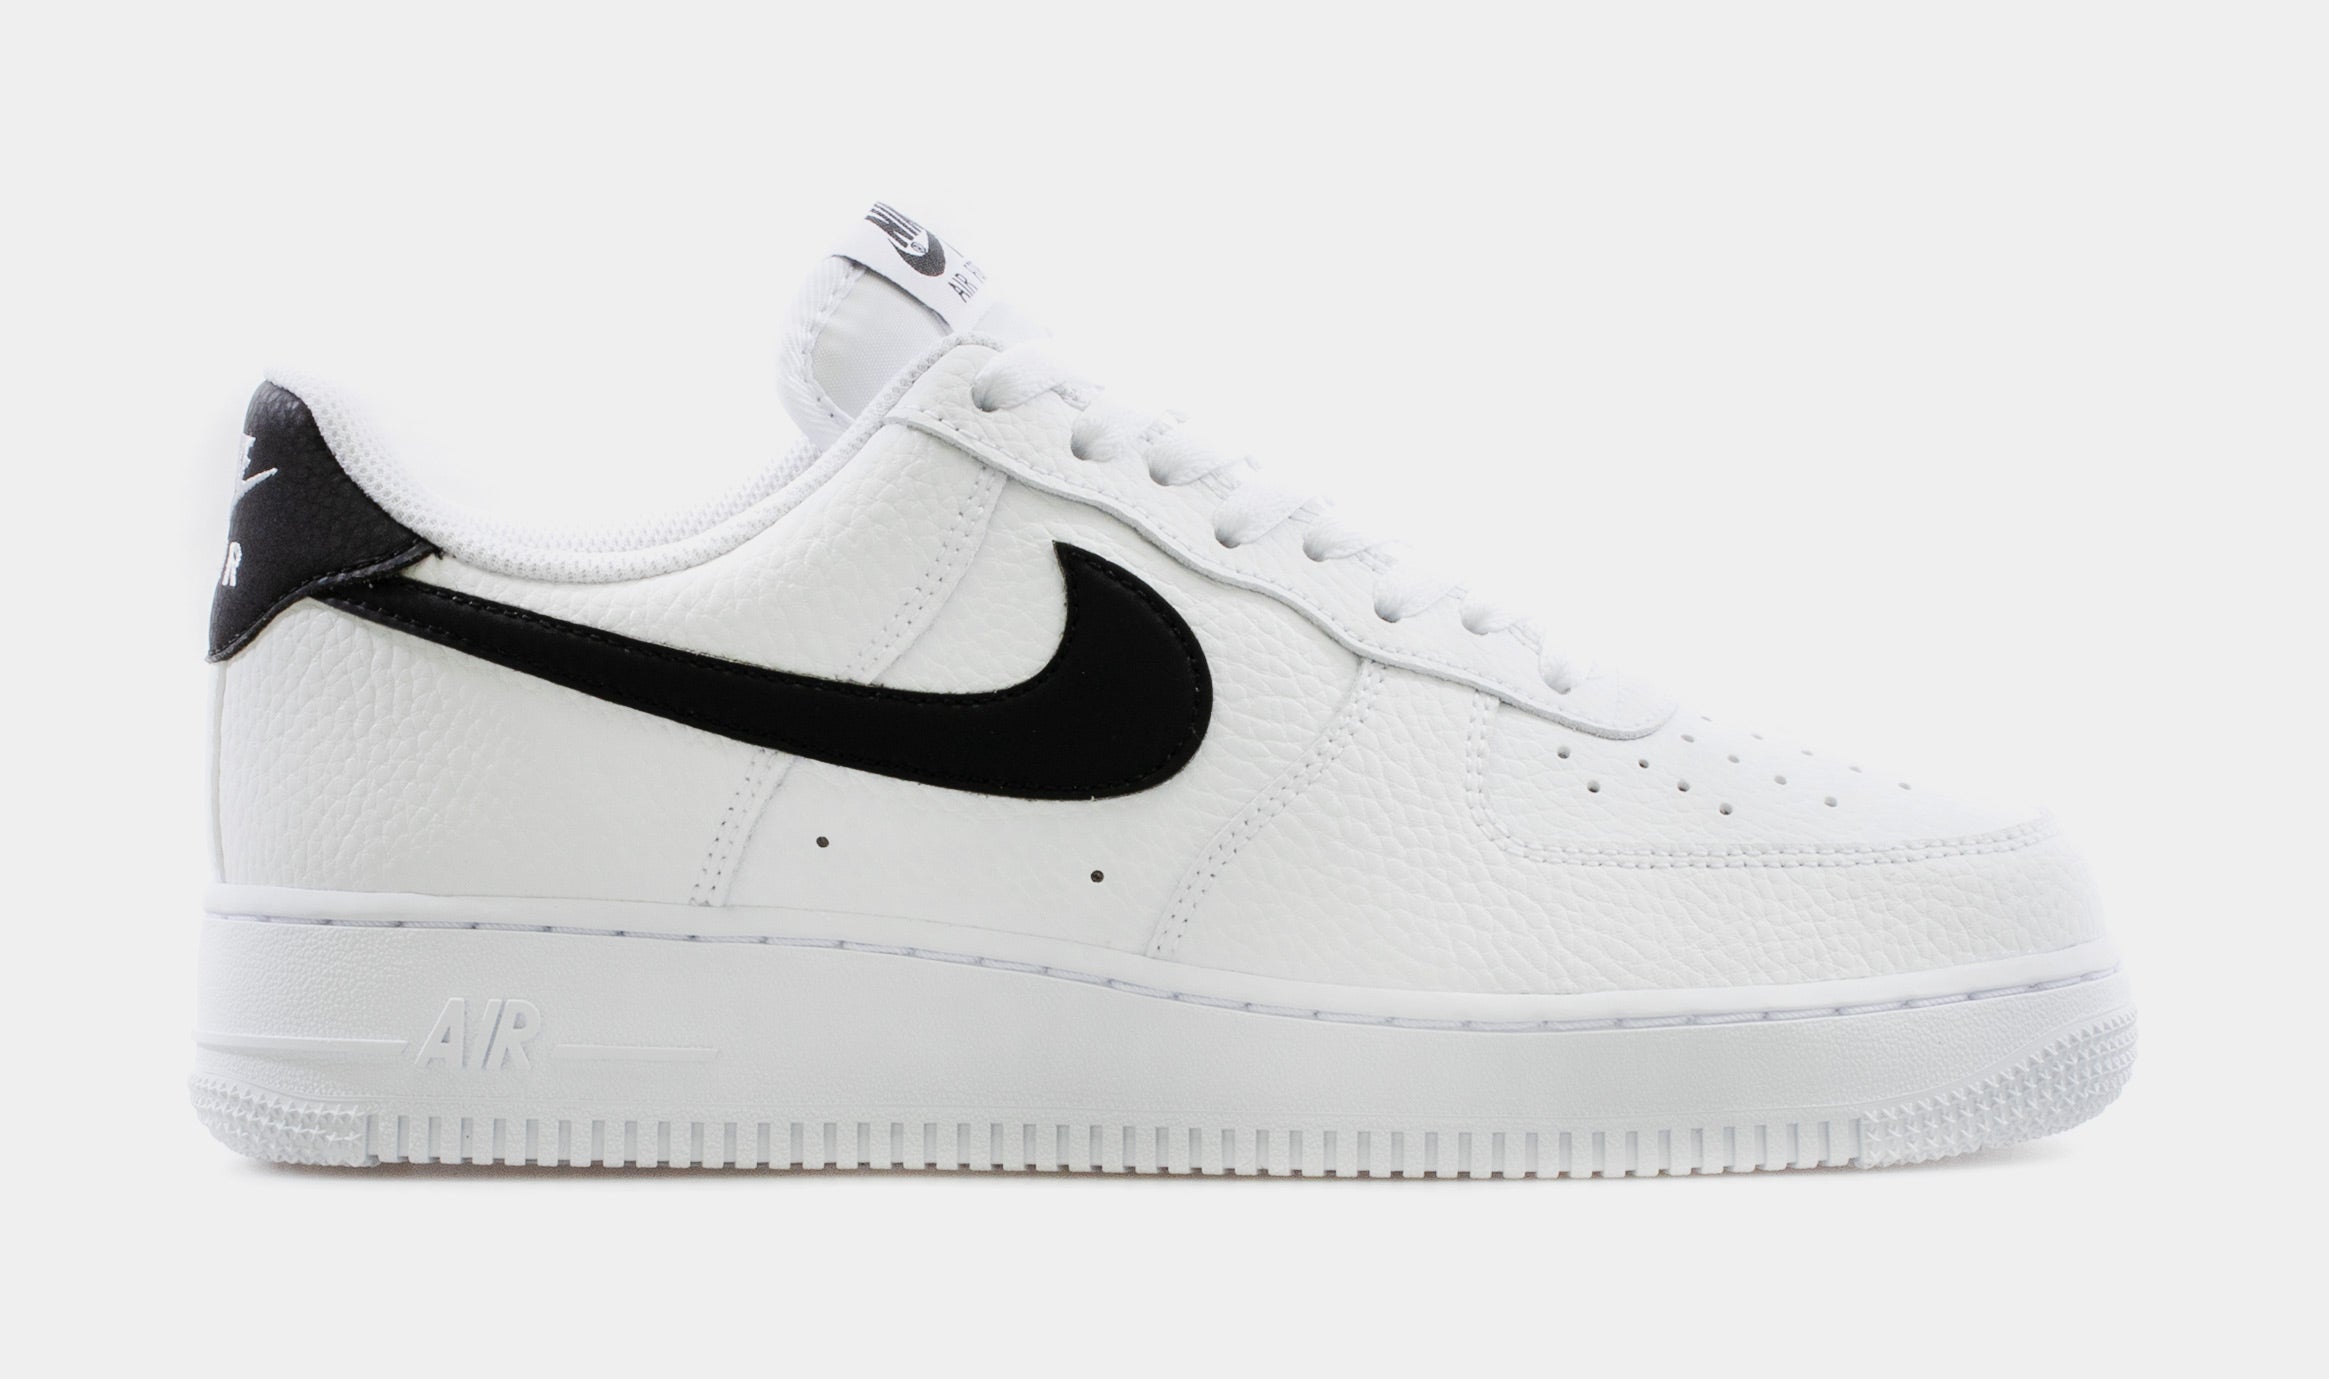 Nike Air Force 1 Mens Lifestyle Shoes White CT2302-100 – Shoe Palace